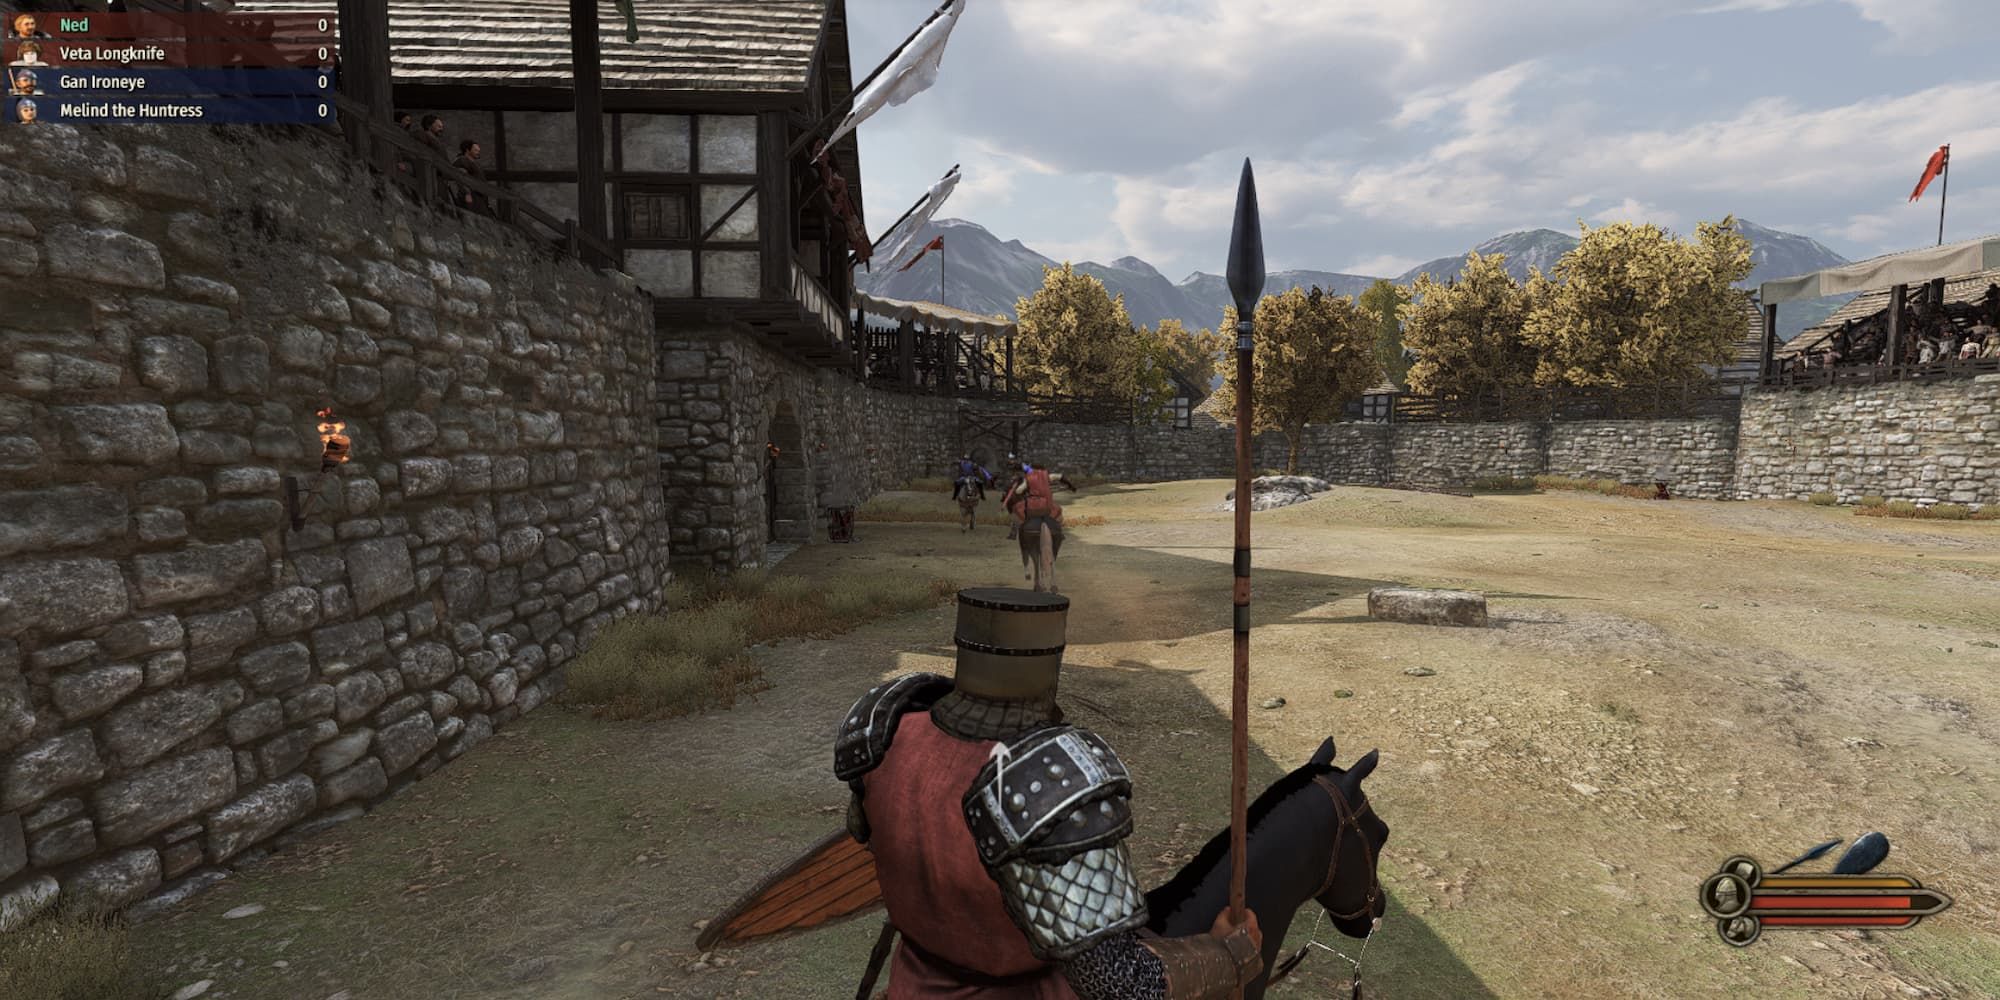 Player On Horseback In A Tournament Battle